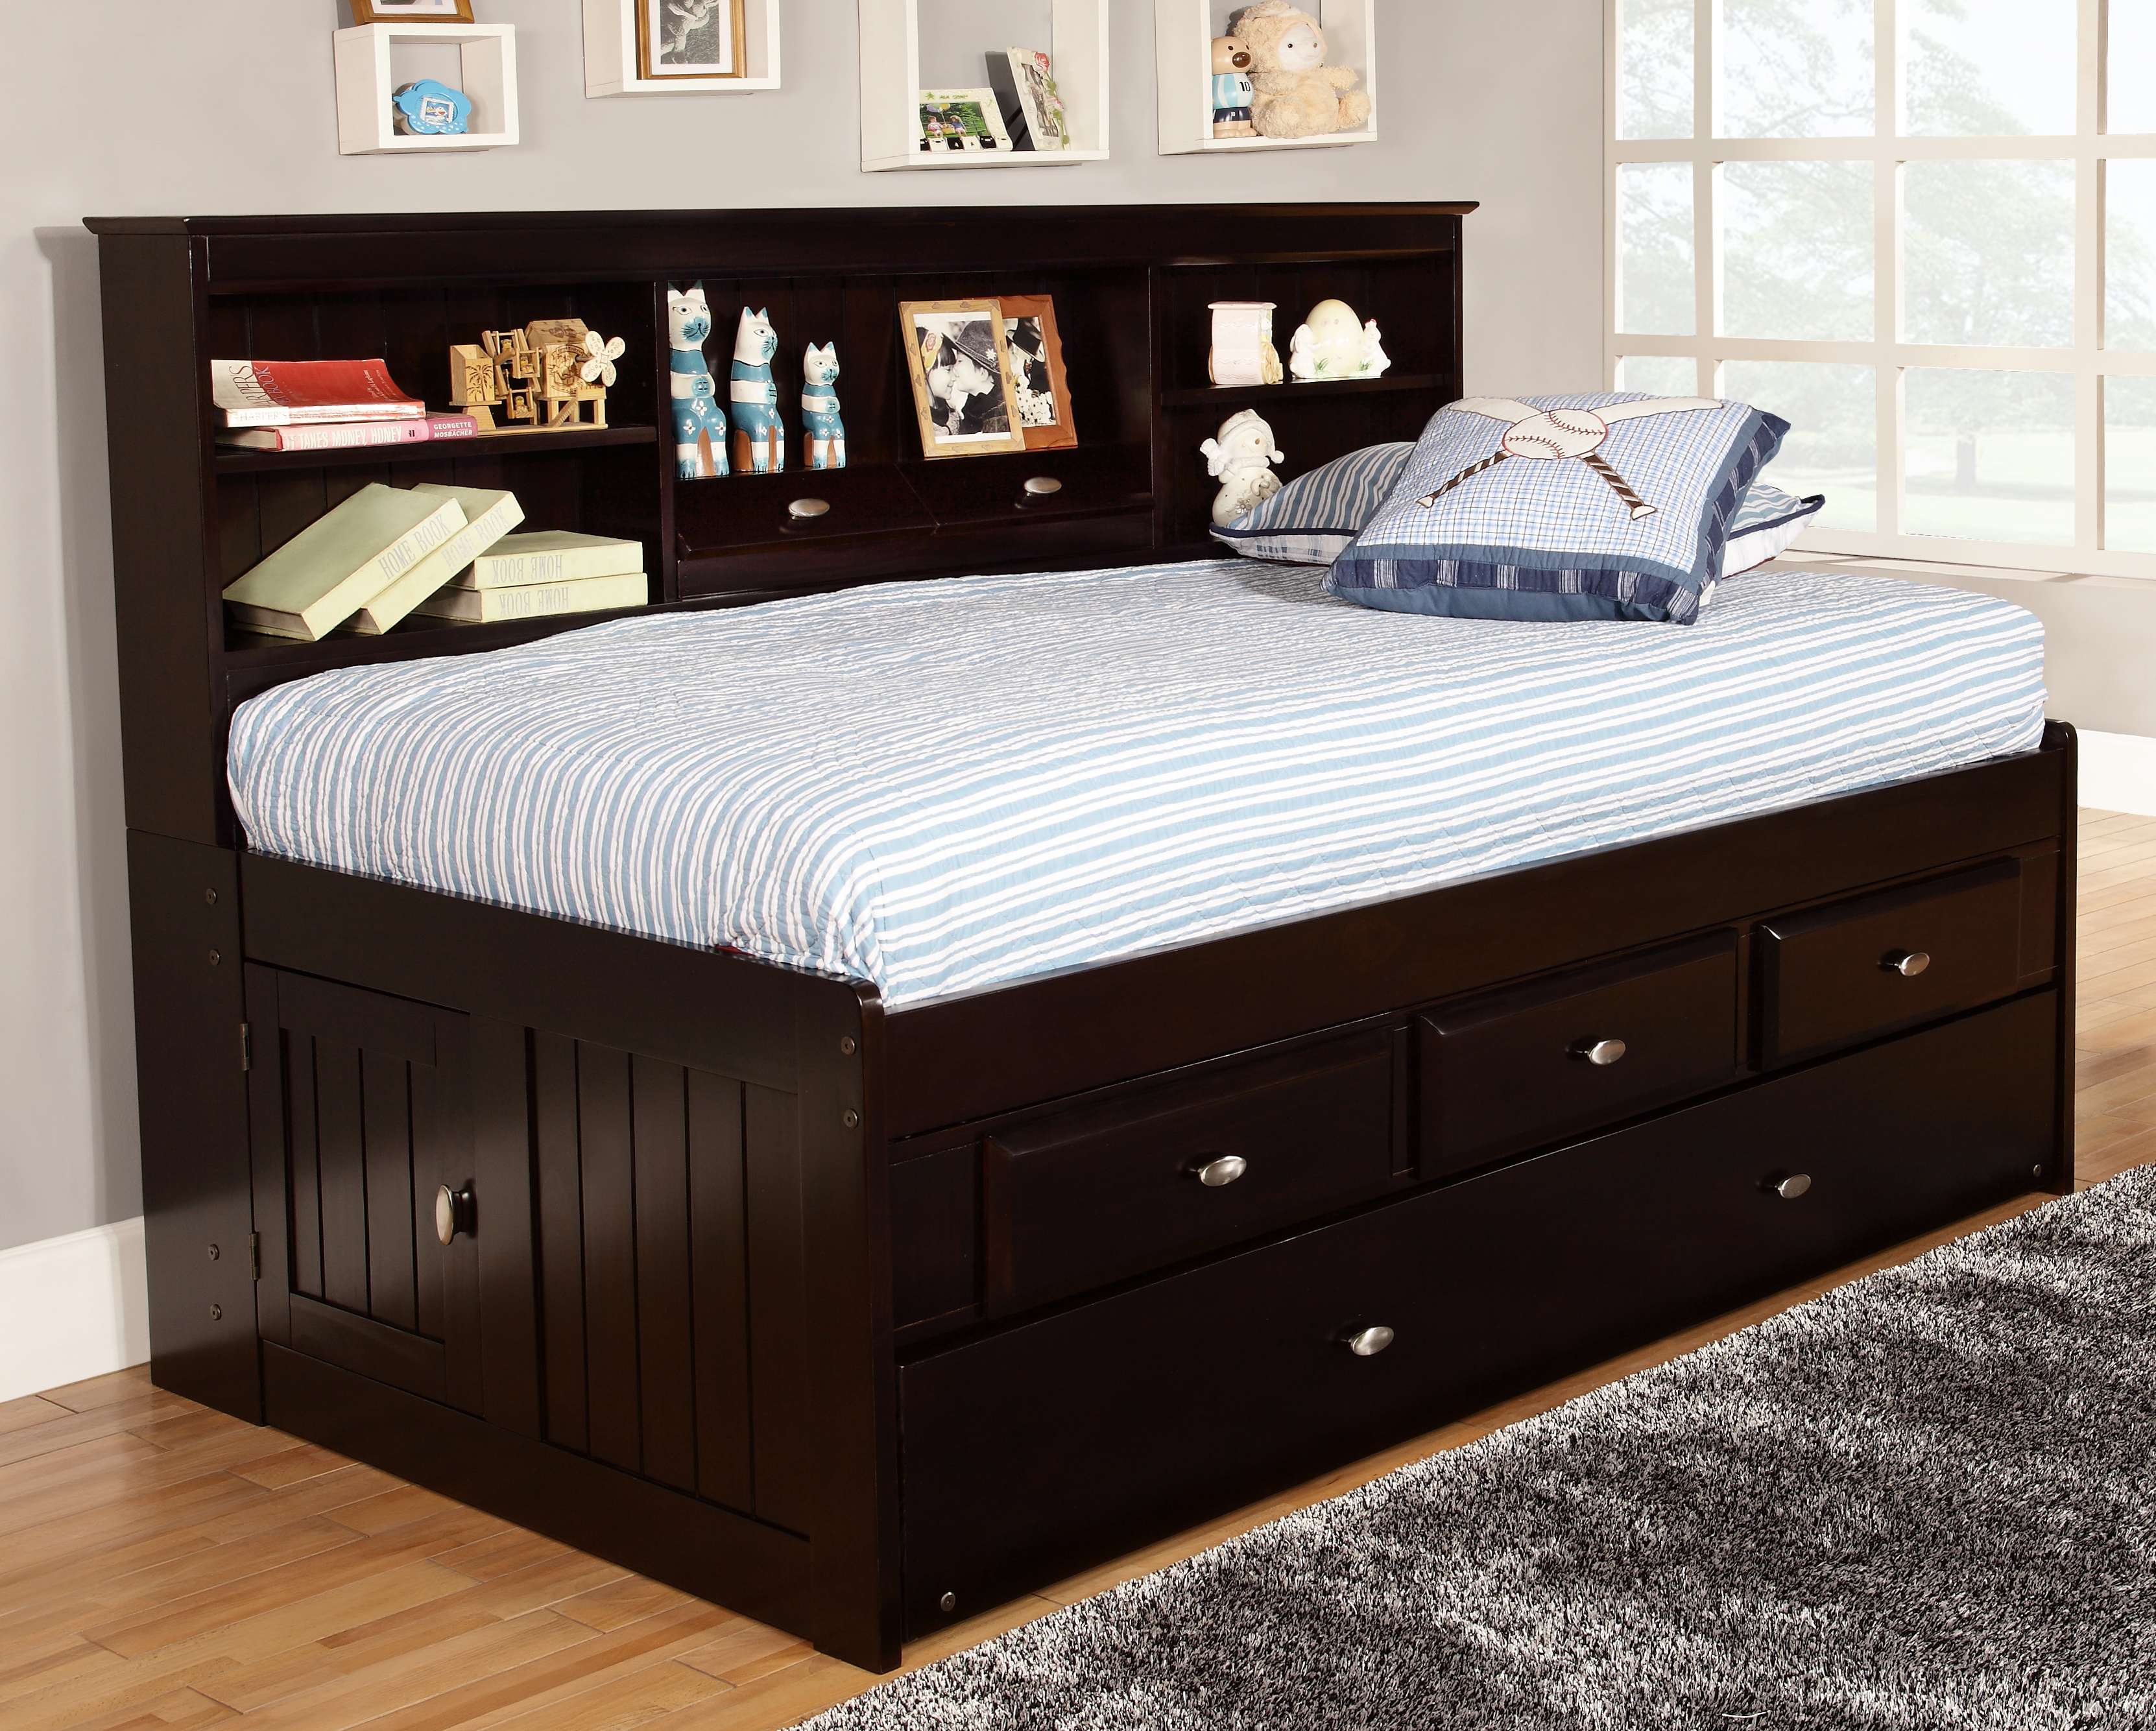 Discovery World Furniture Espresso Twin, Rooms To Go Twin Captains Bed